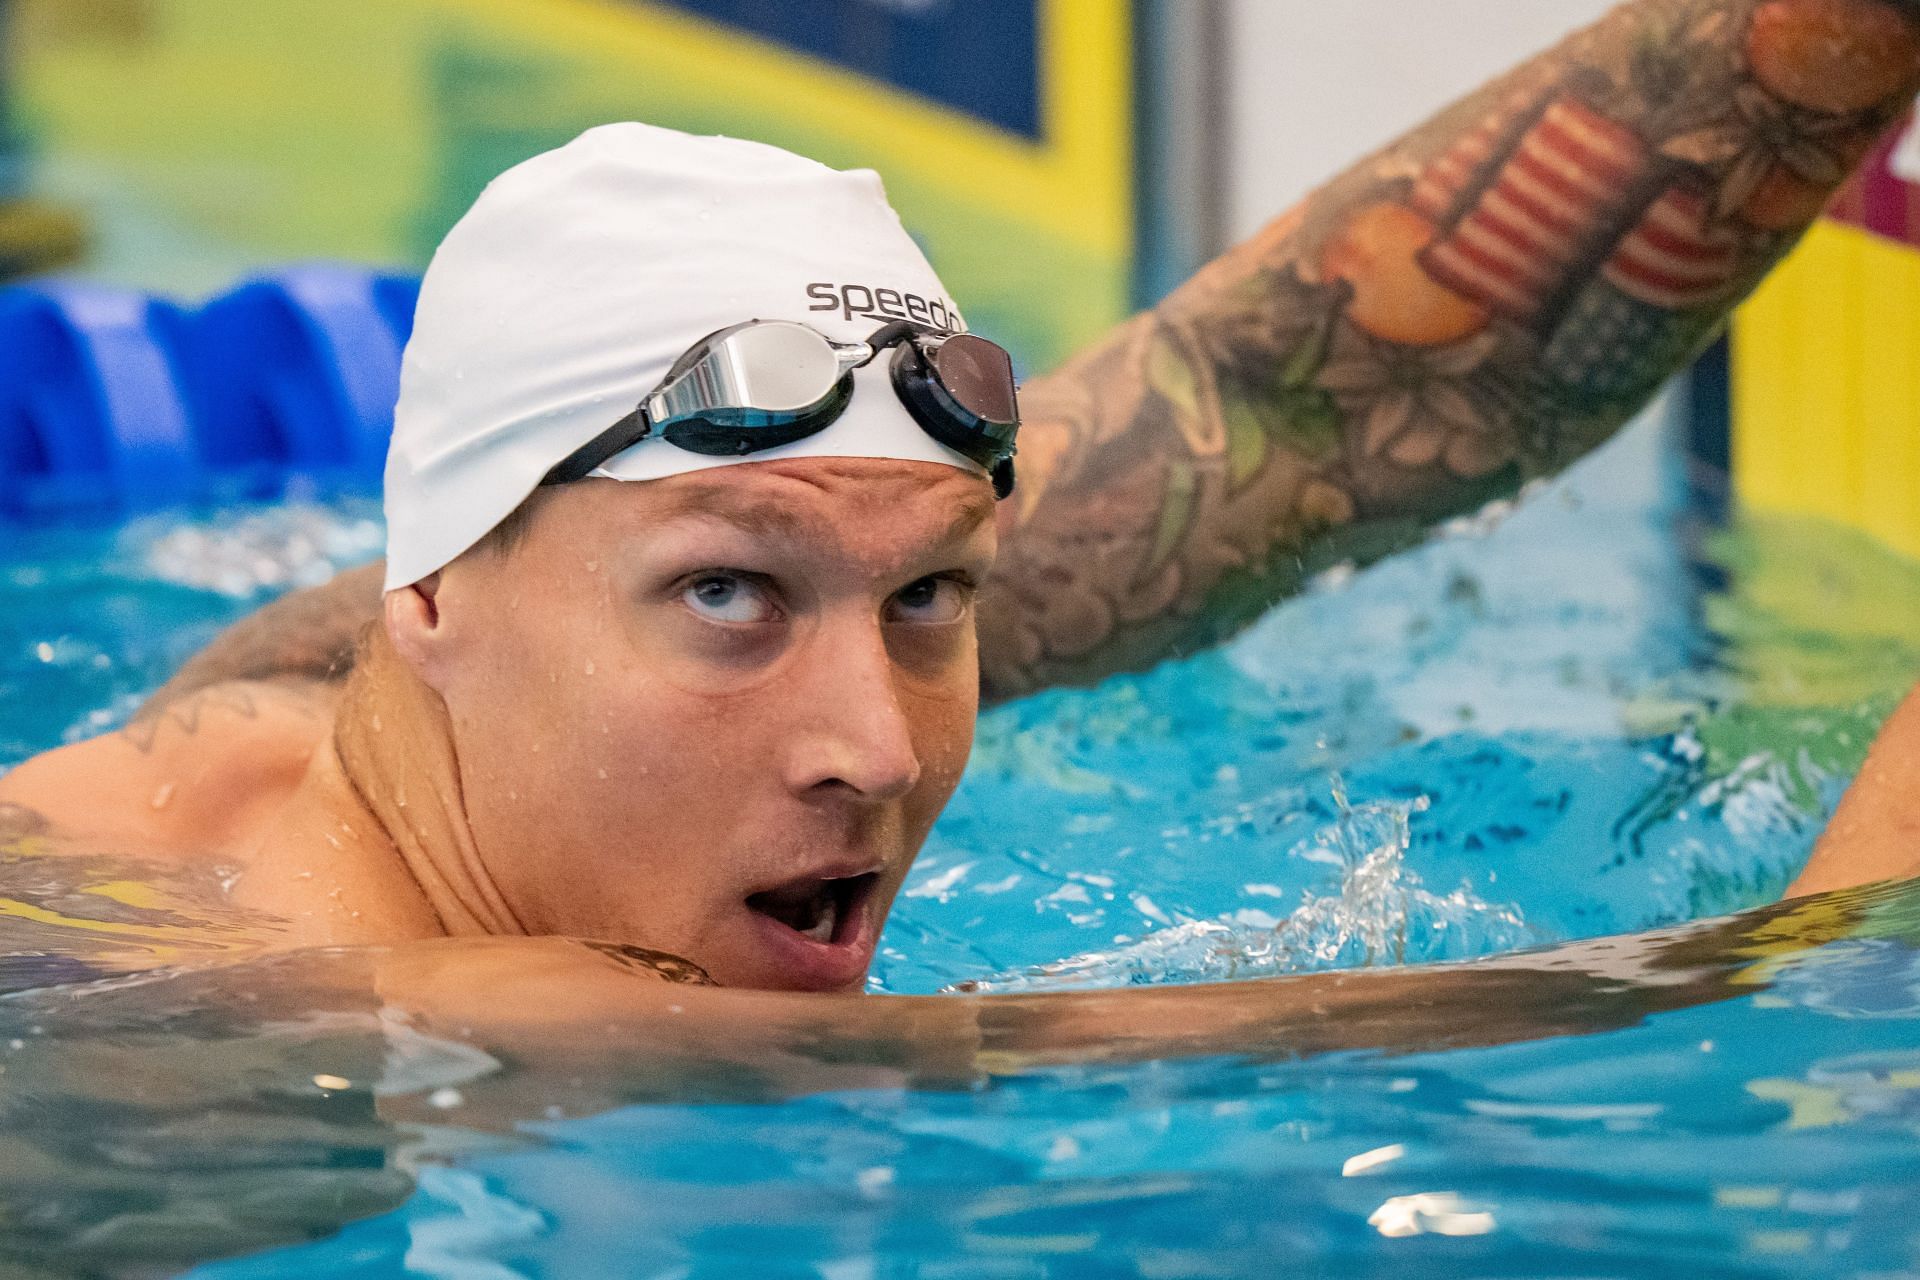 Dressel at Toyota US Open - Day 4